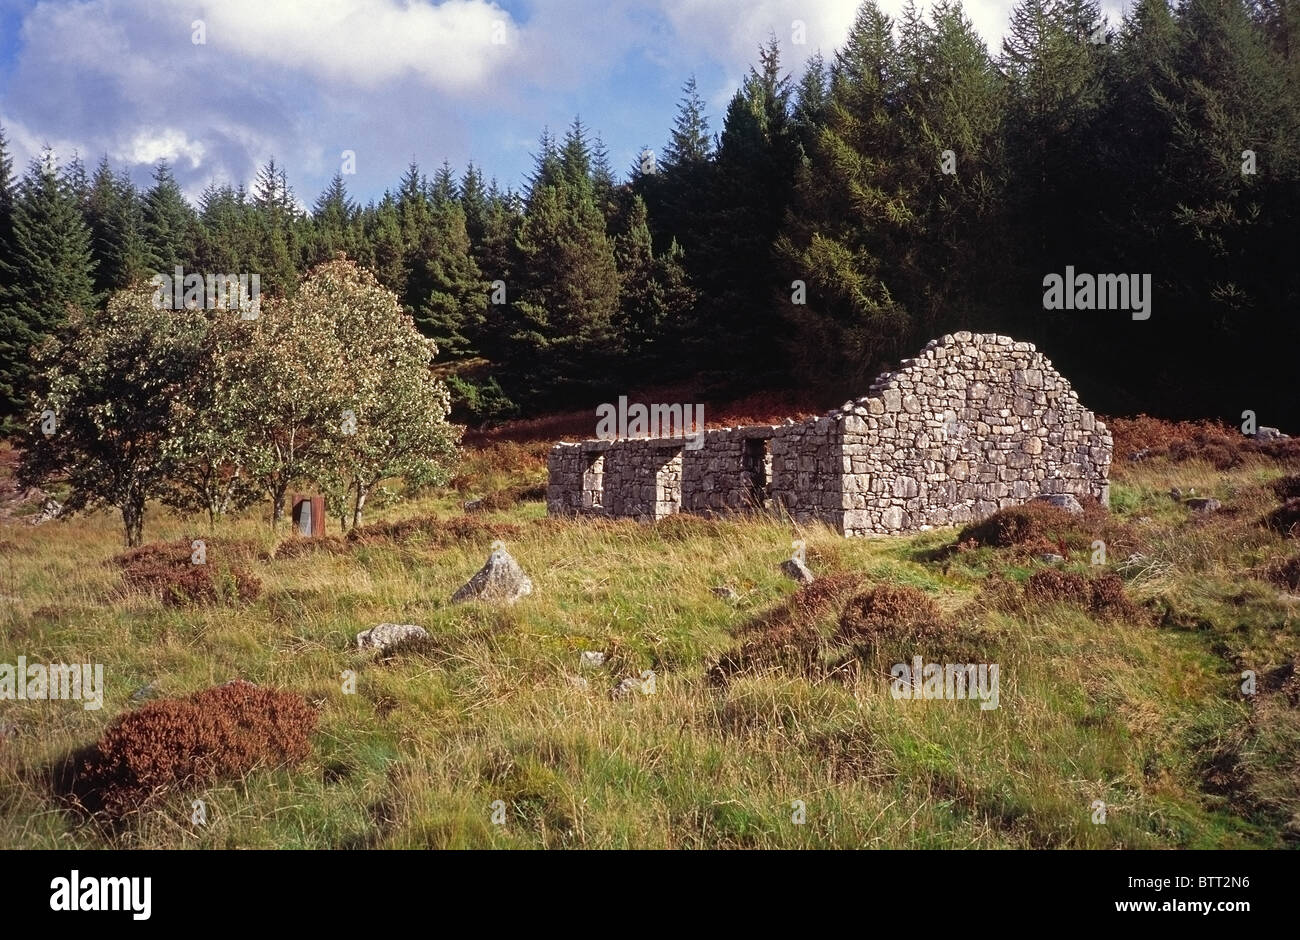 Dunkitterick Cottage, Alexander Murray's Birthplace, Galloway Forest Park, Dumfries and Galloway, Scotland, UK Stock Photo